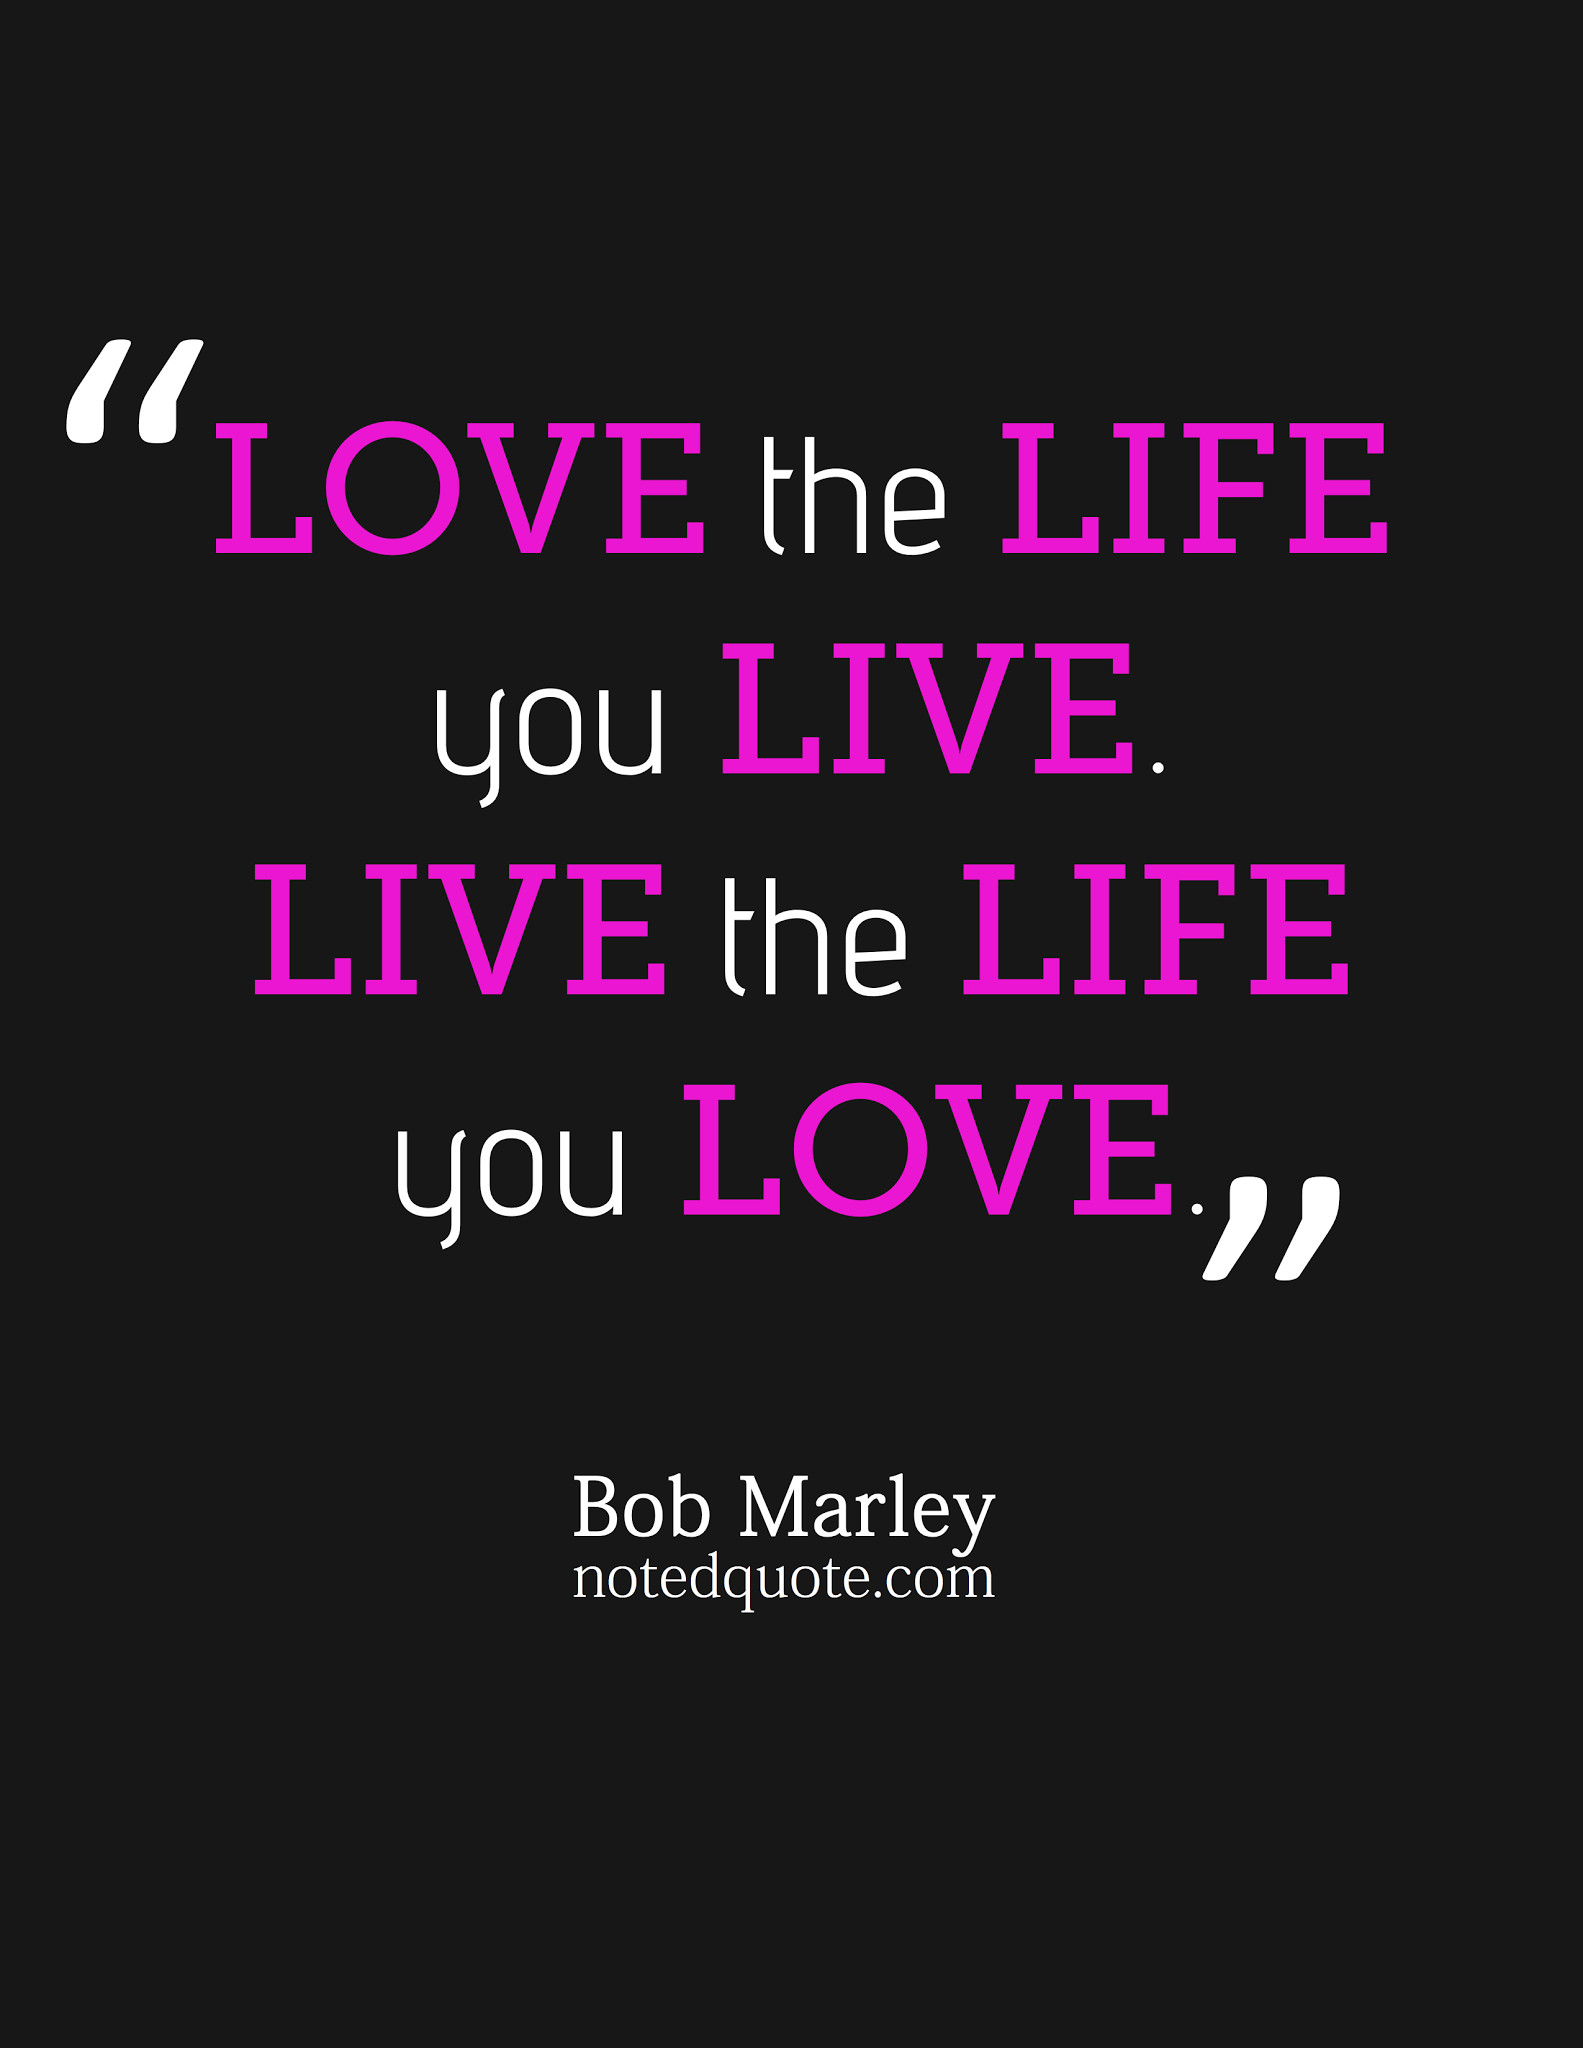 Bob Marley Quotes Love
 He S Not Perfect Bob Marley Quotes About Love QuotesGram